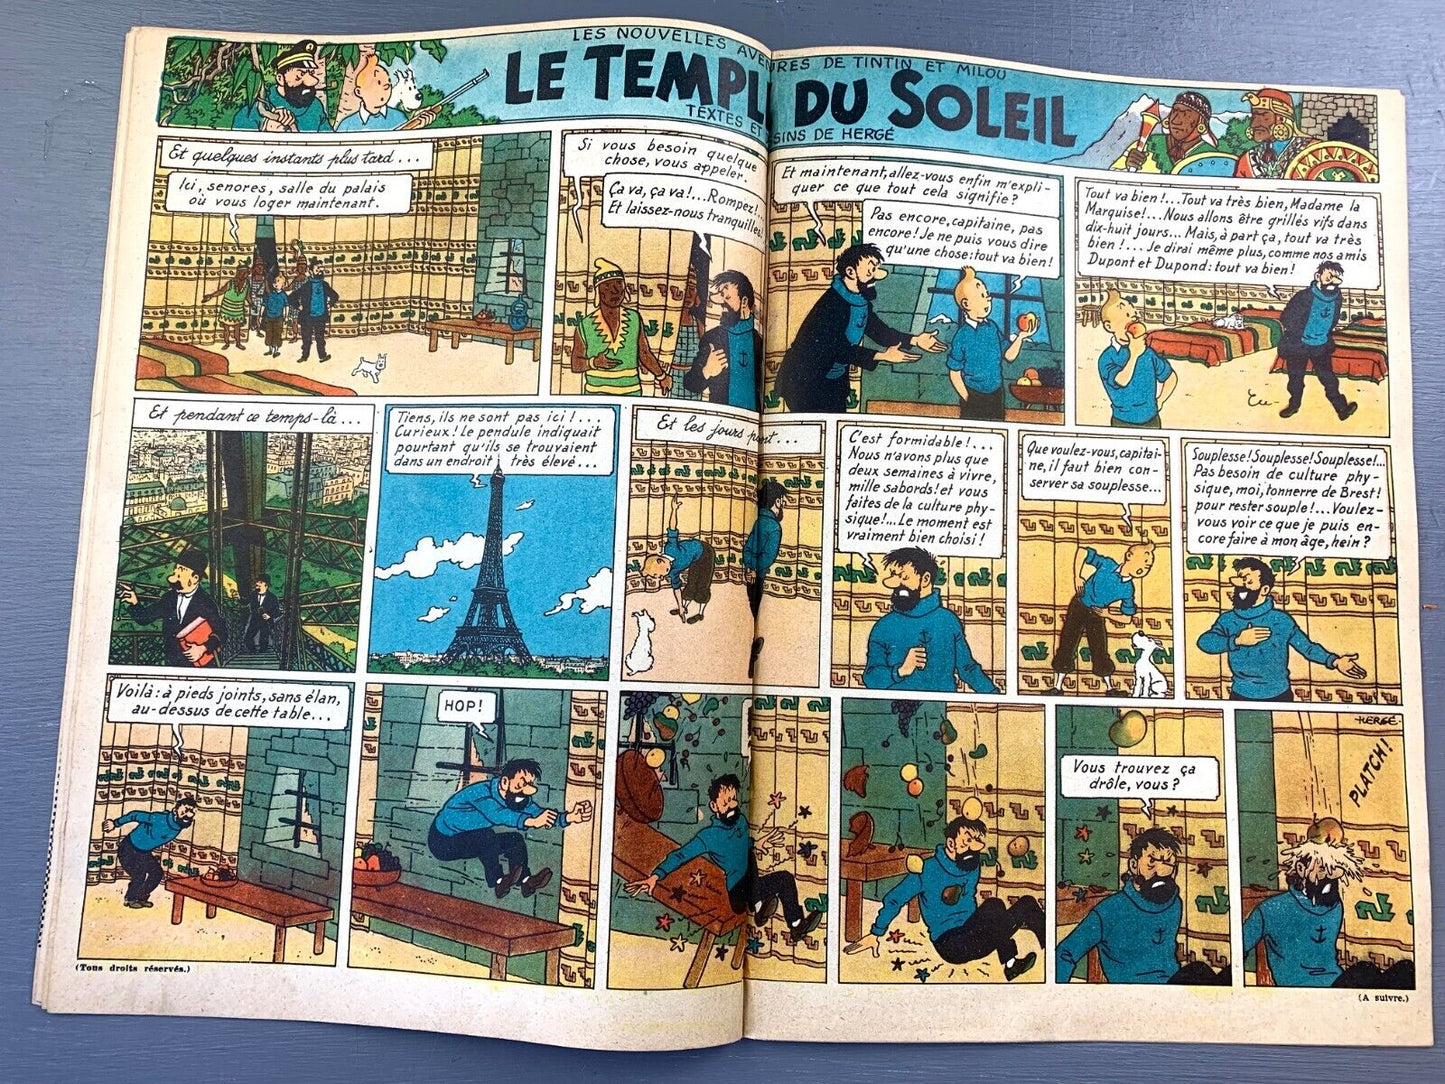 Journal Tintin Issue 10 1948 Herge Cover Edition Originale HB Vintage Comic EO